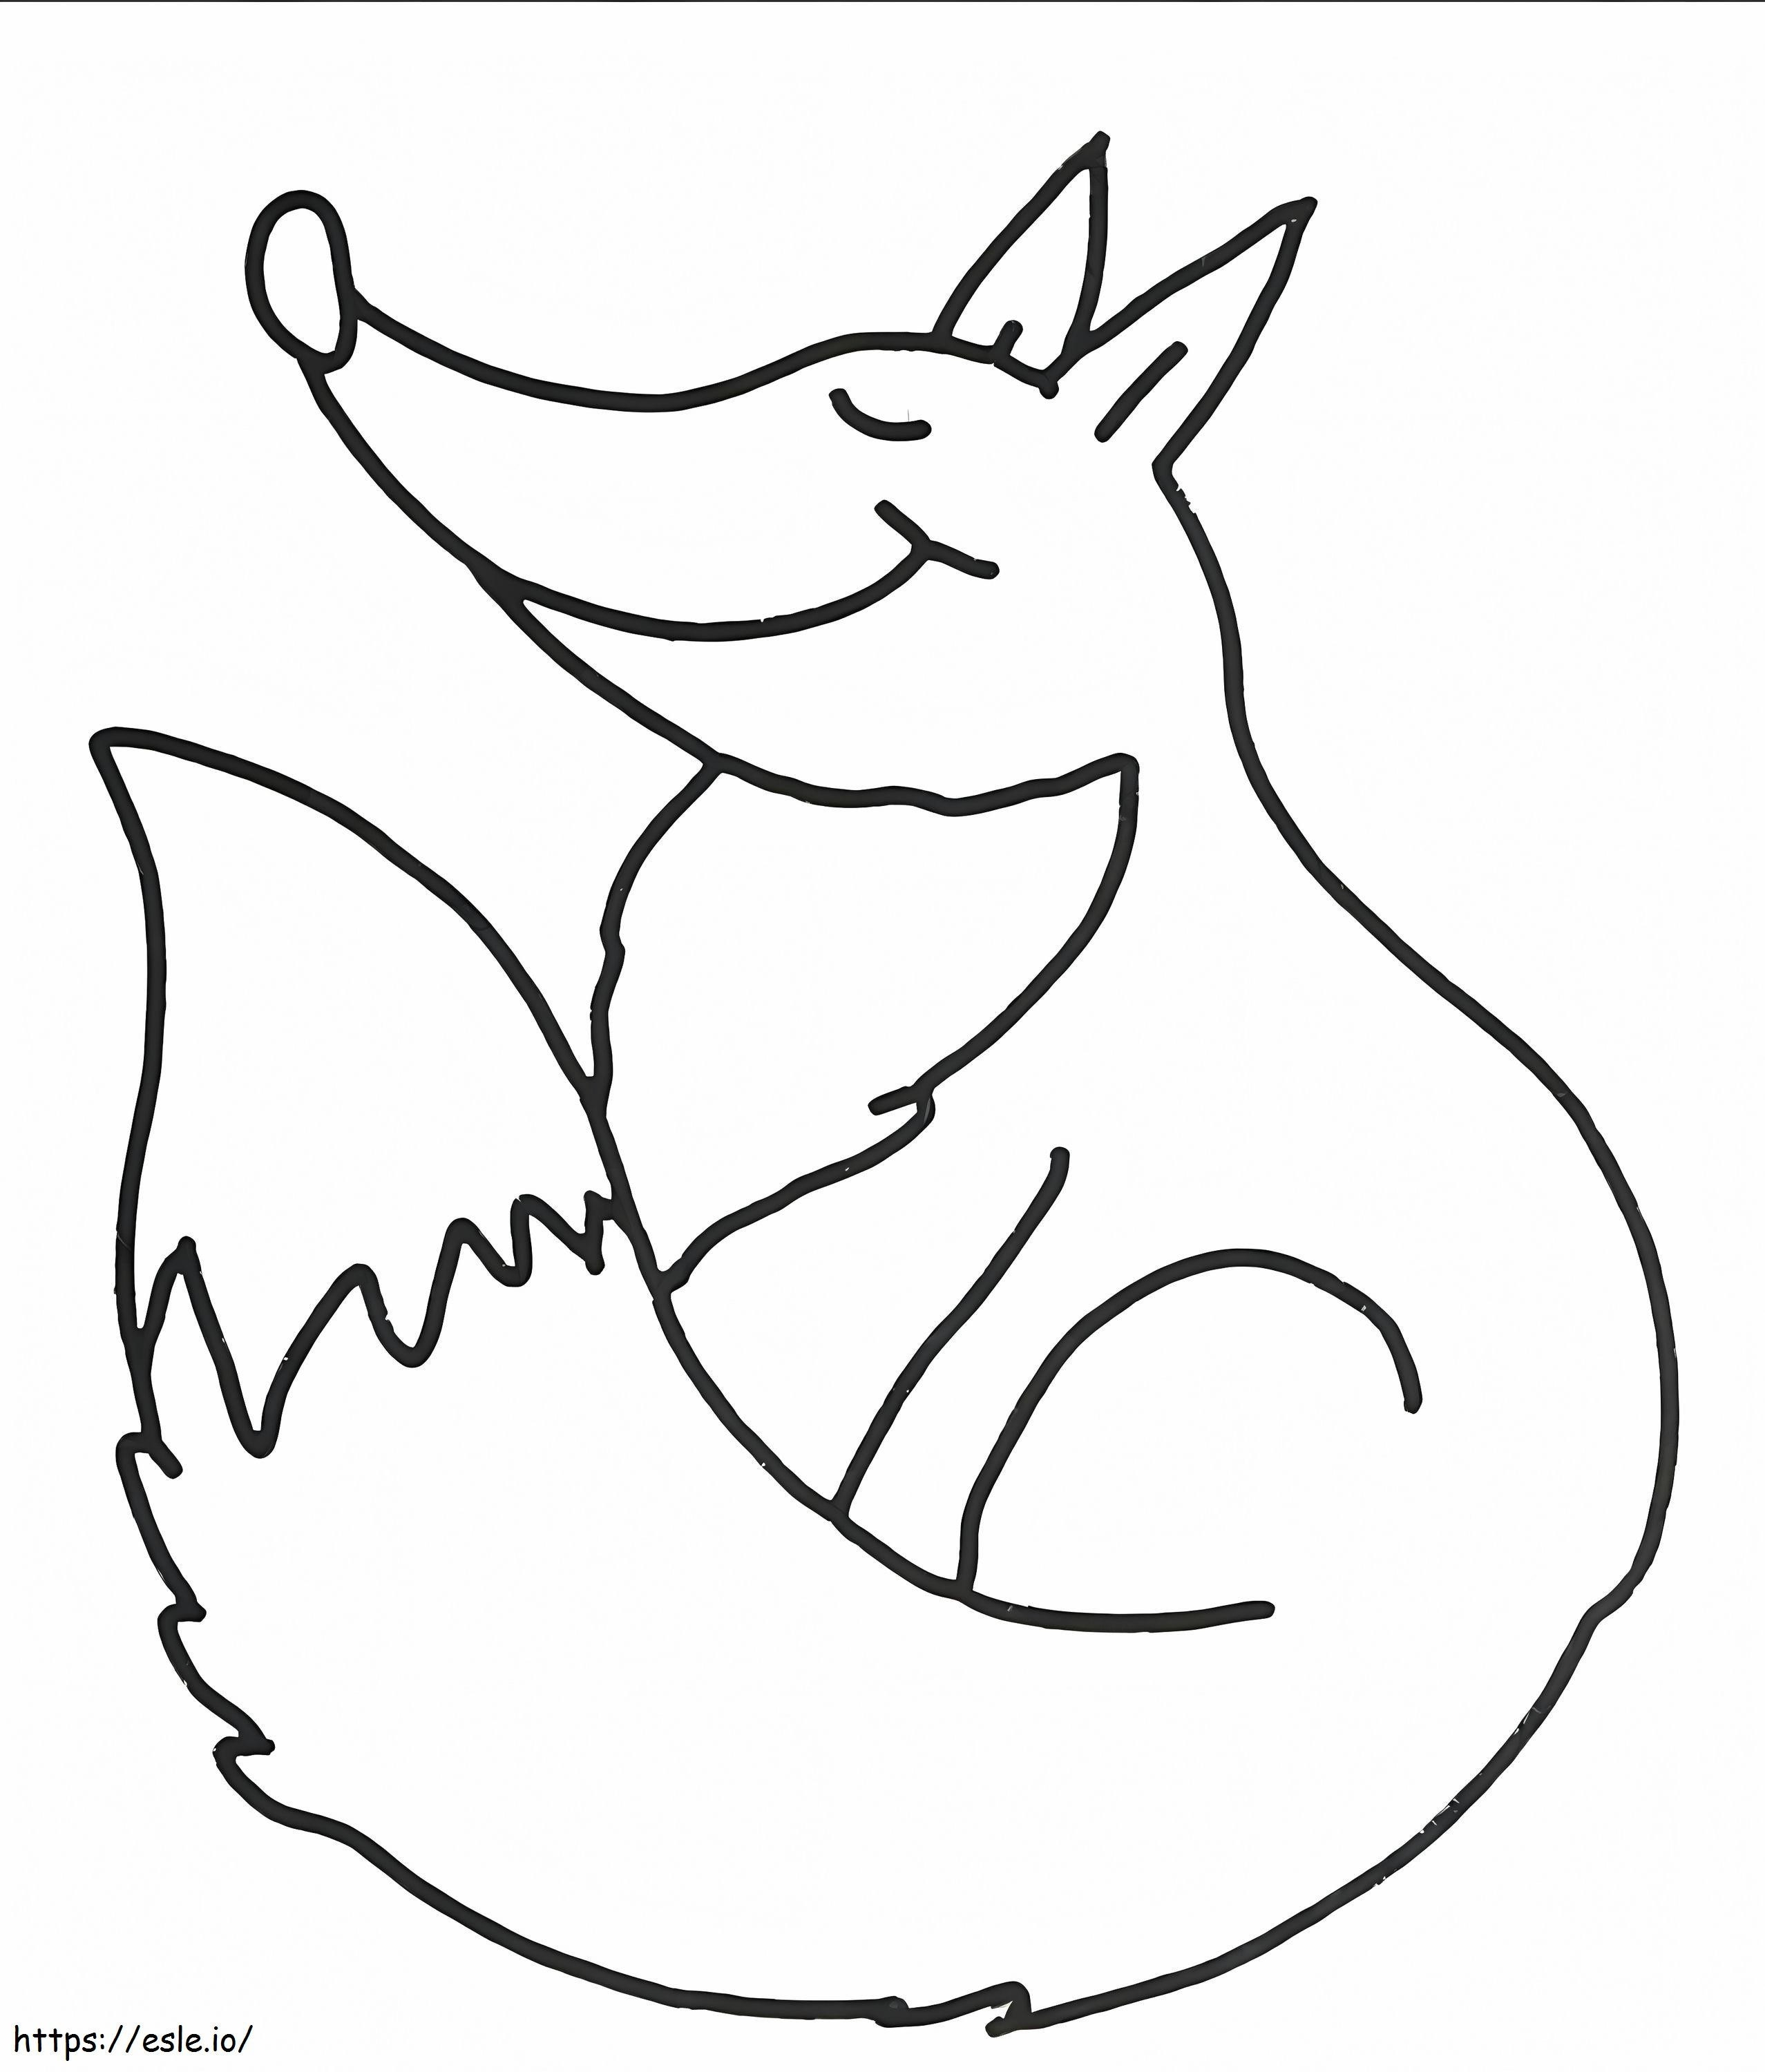 A Smiling Fox coloring page